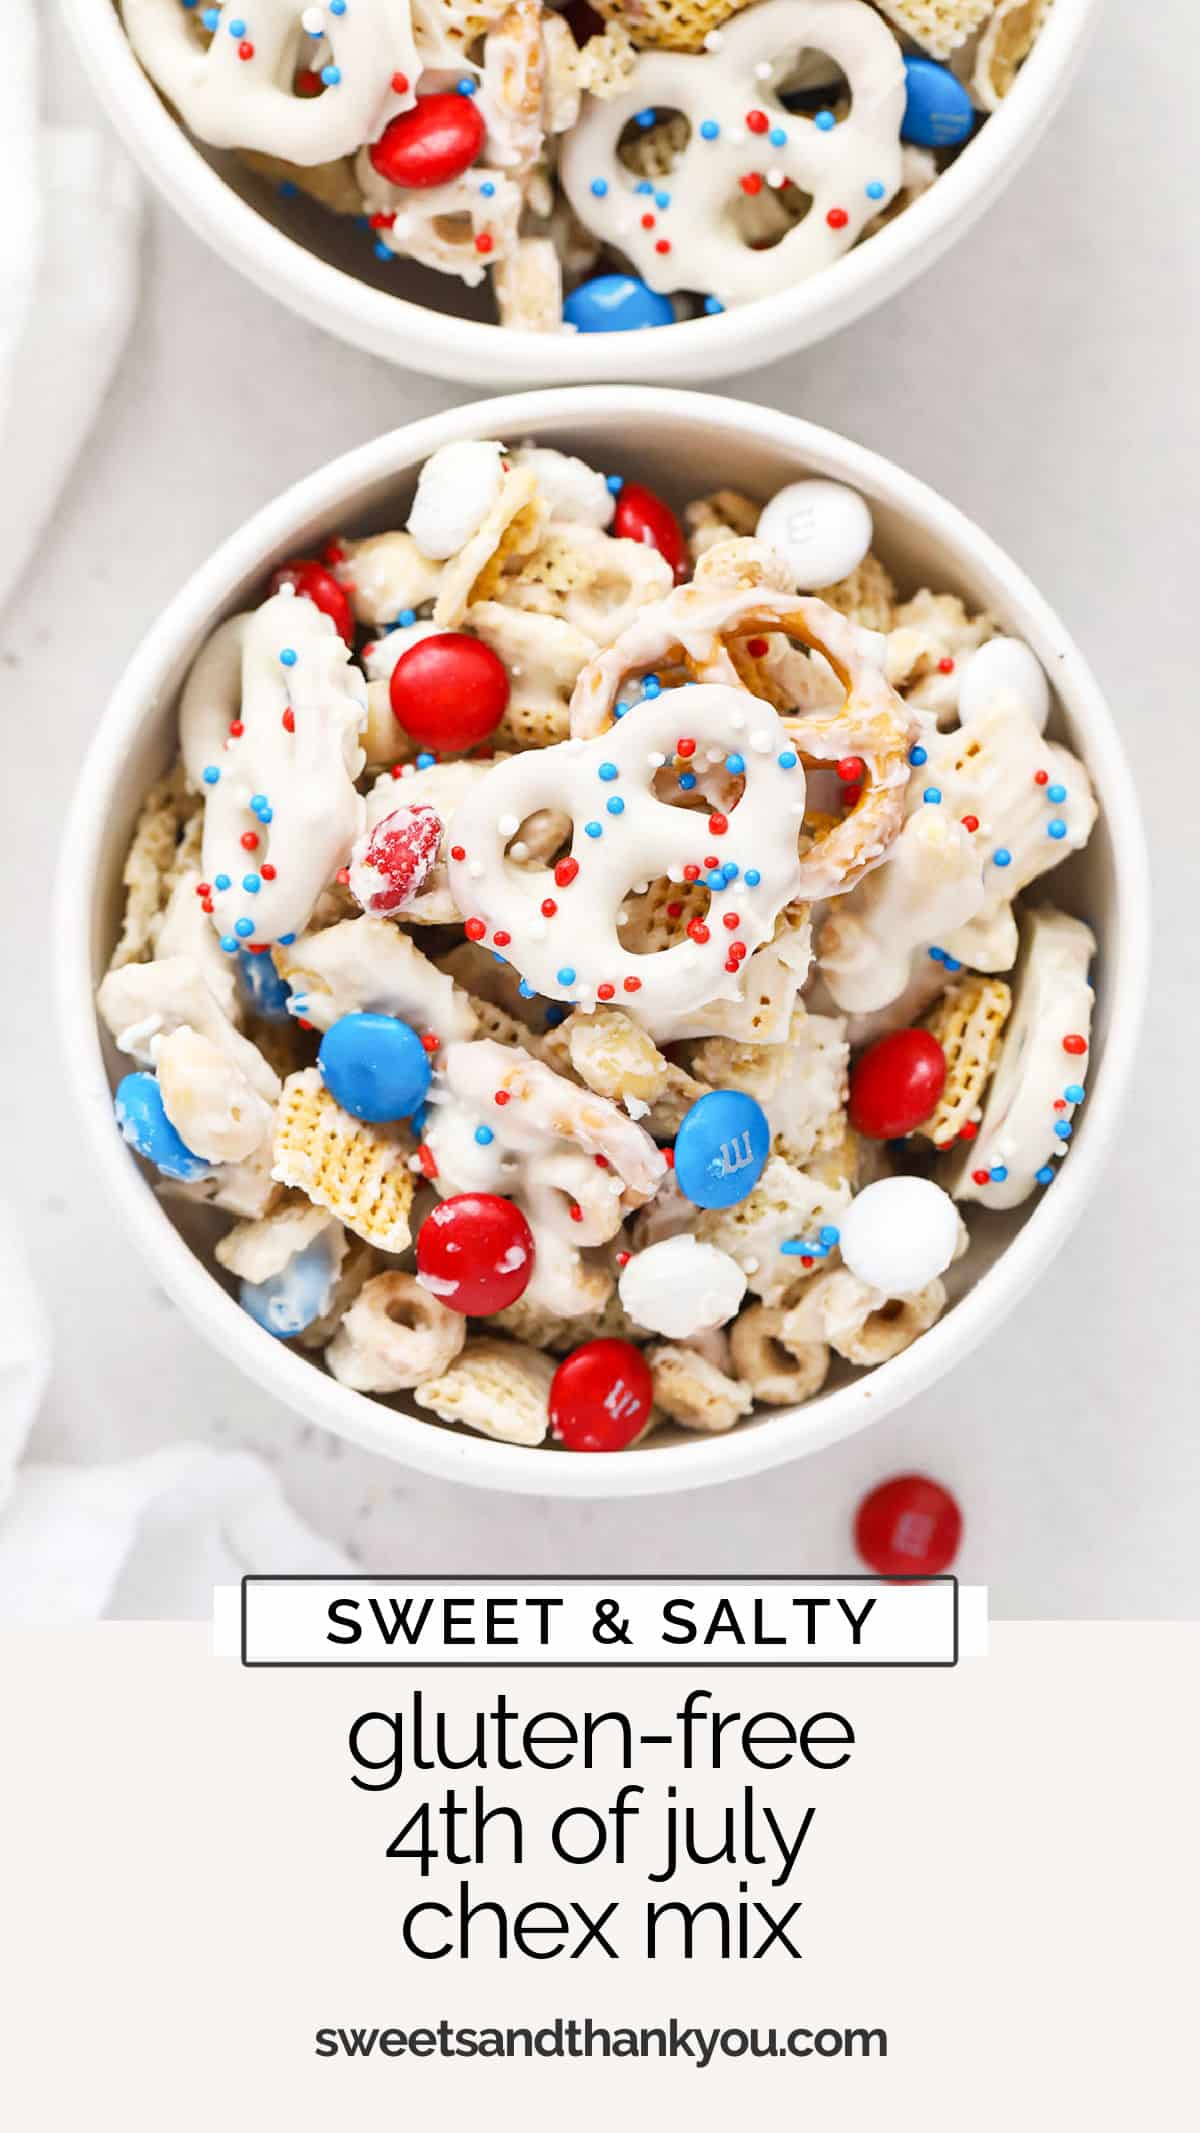 This crispy, crunchy Gluten-Free 4th of July Chex Mix recipe is an easy red, white, and blue treat for summer. Try it for summer BBQs, game or movie nights, pool parties & more! / red white blue chex / red white and blue chex mix / red white and blue snack mix / gluten free 4th of july snack mix / gluten free 4th of july dessert / gluten free no bake dessert / patriotic snack mix / patriotic chex mix / summer snack mix / summer dessert